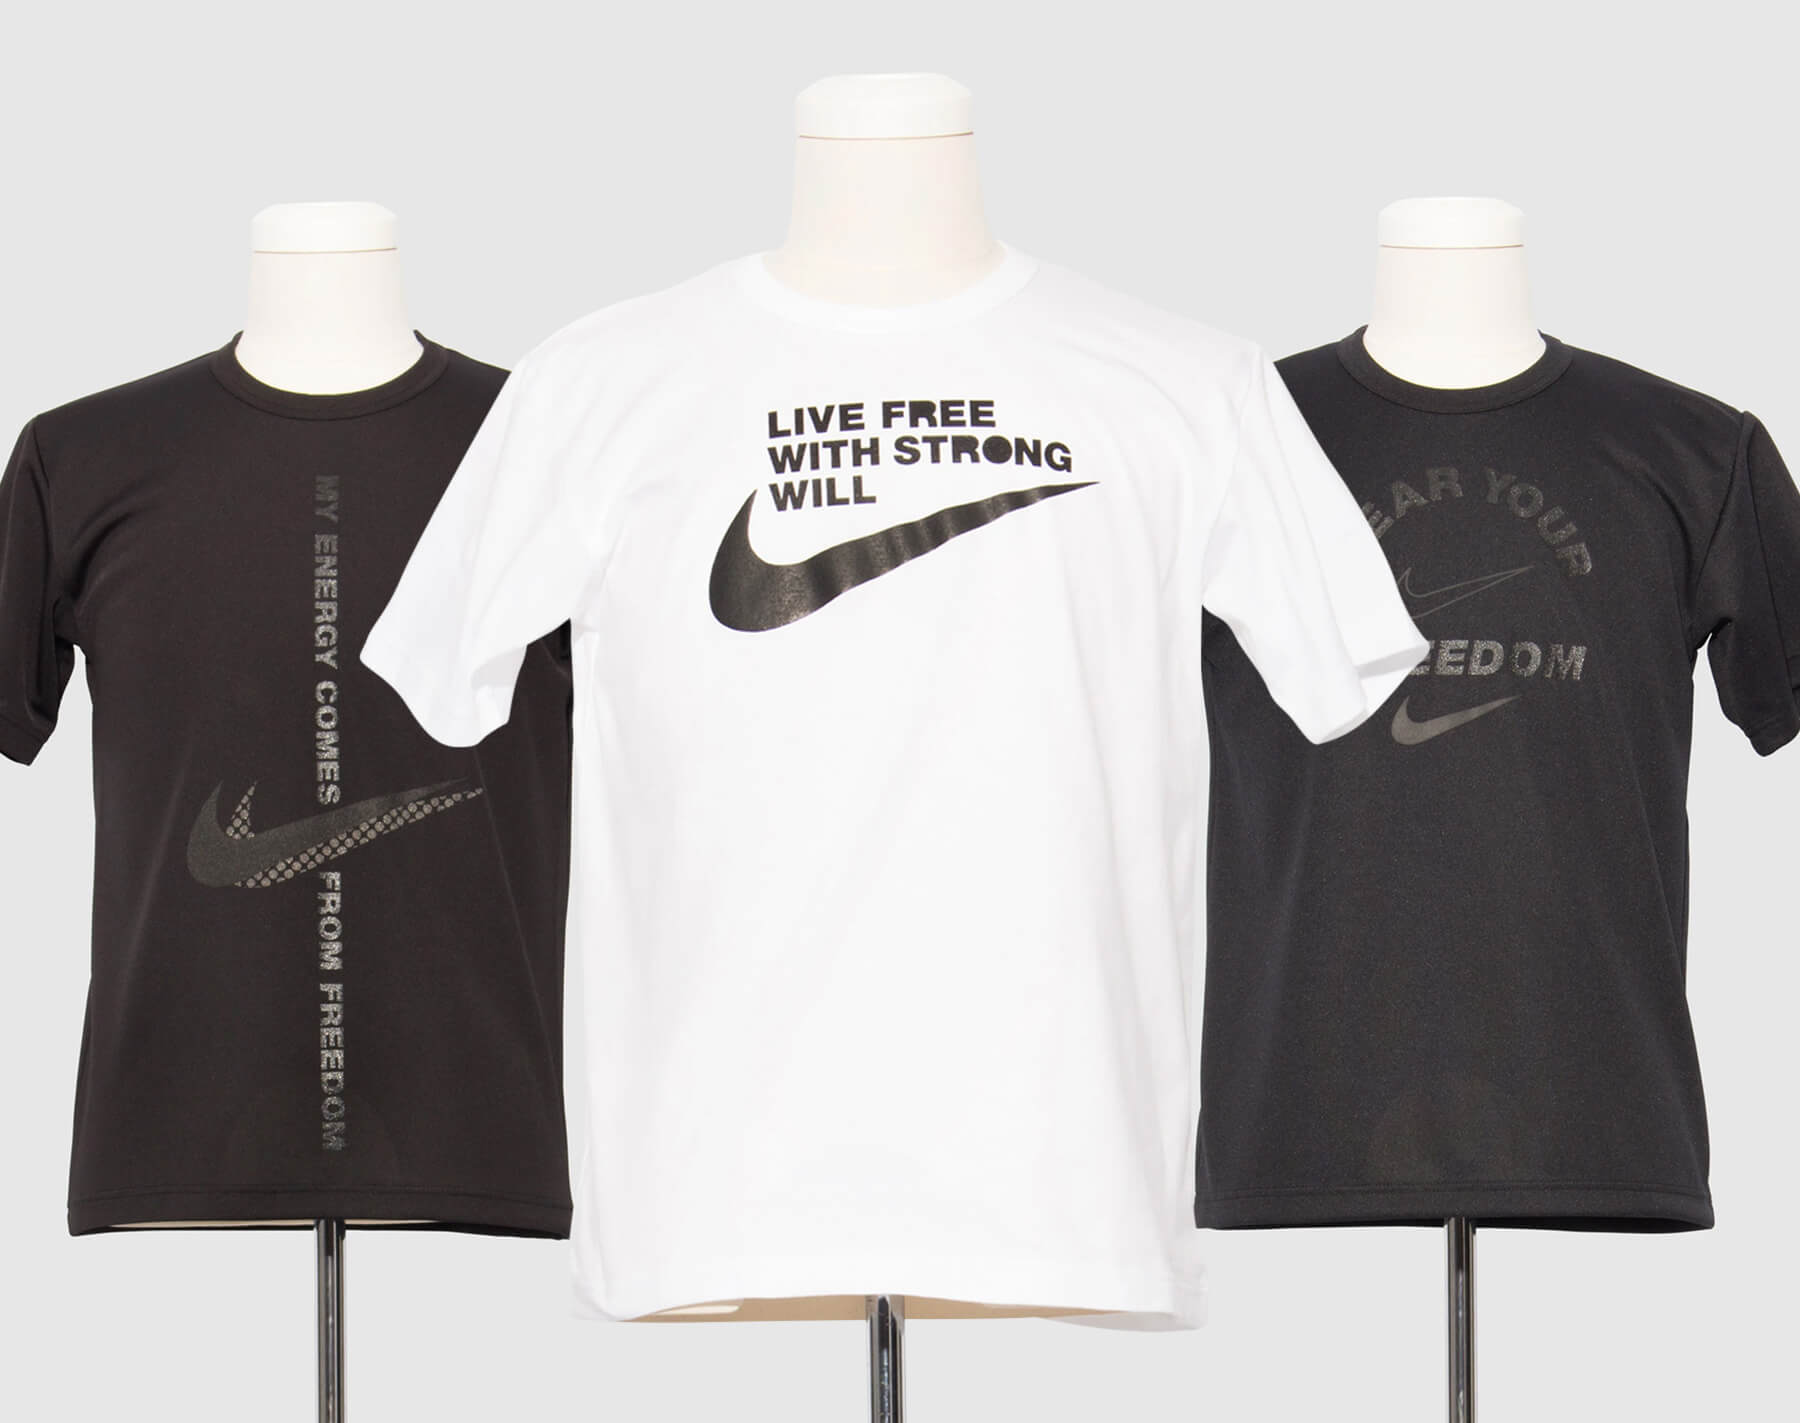 LOOK: New releases from Black Comme des Garçons x Nike – Garage